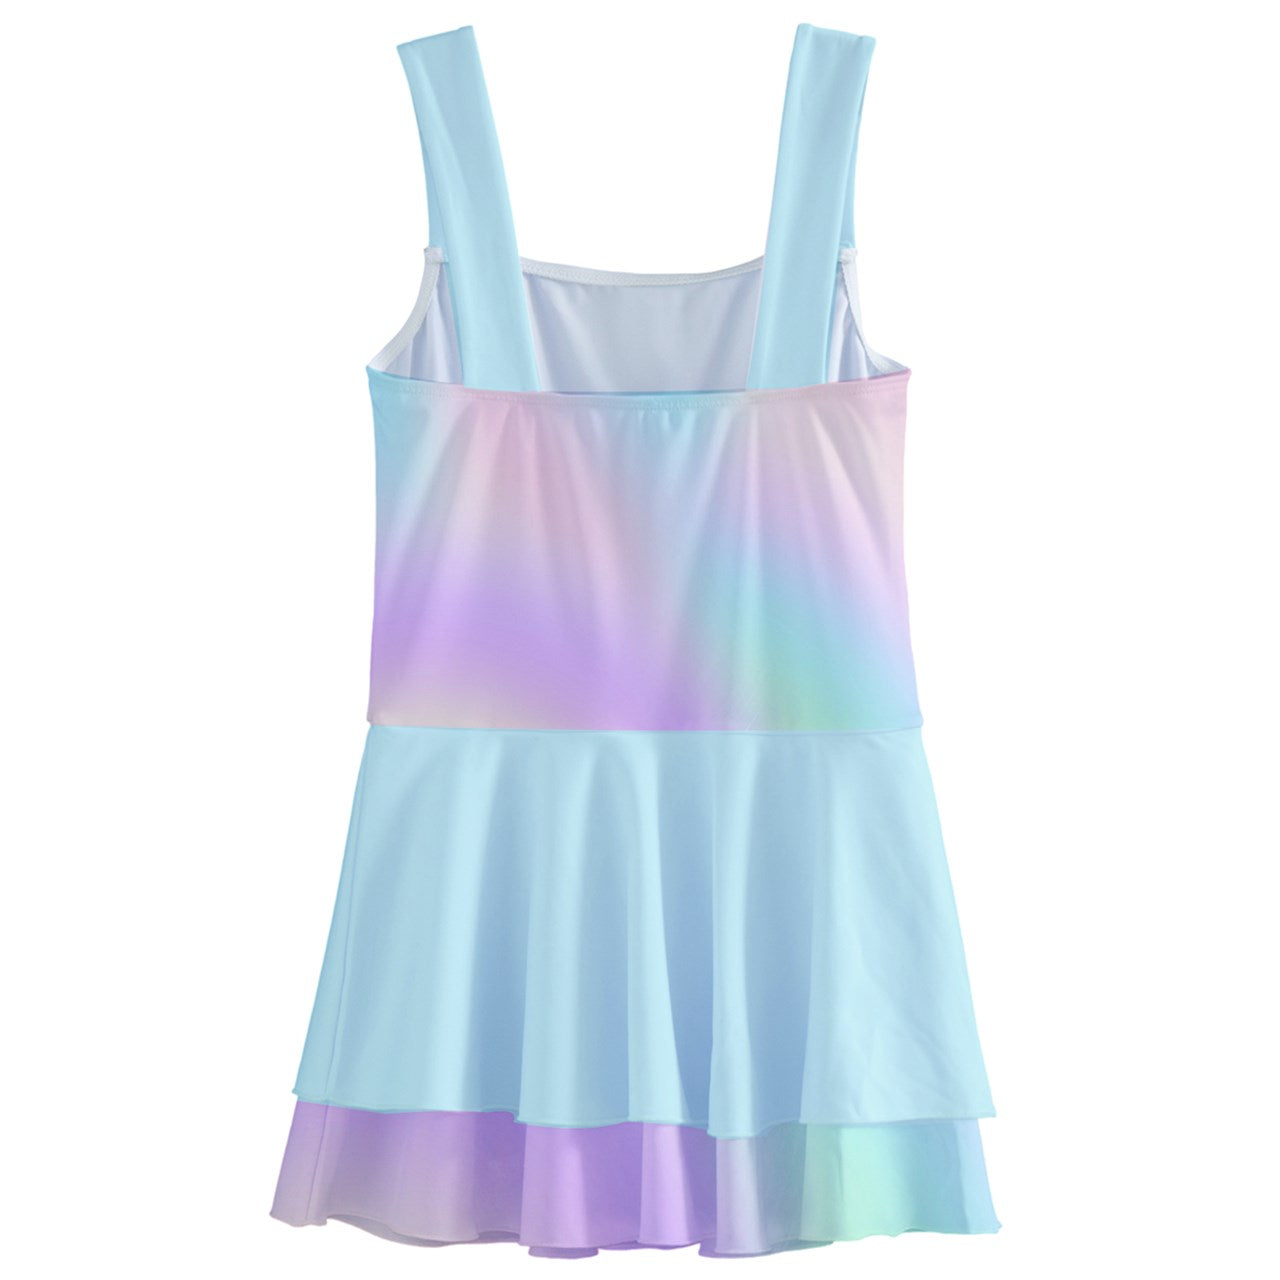 Cotton Candy Prism Kids' Layered Skirt Swimsuit